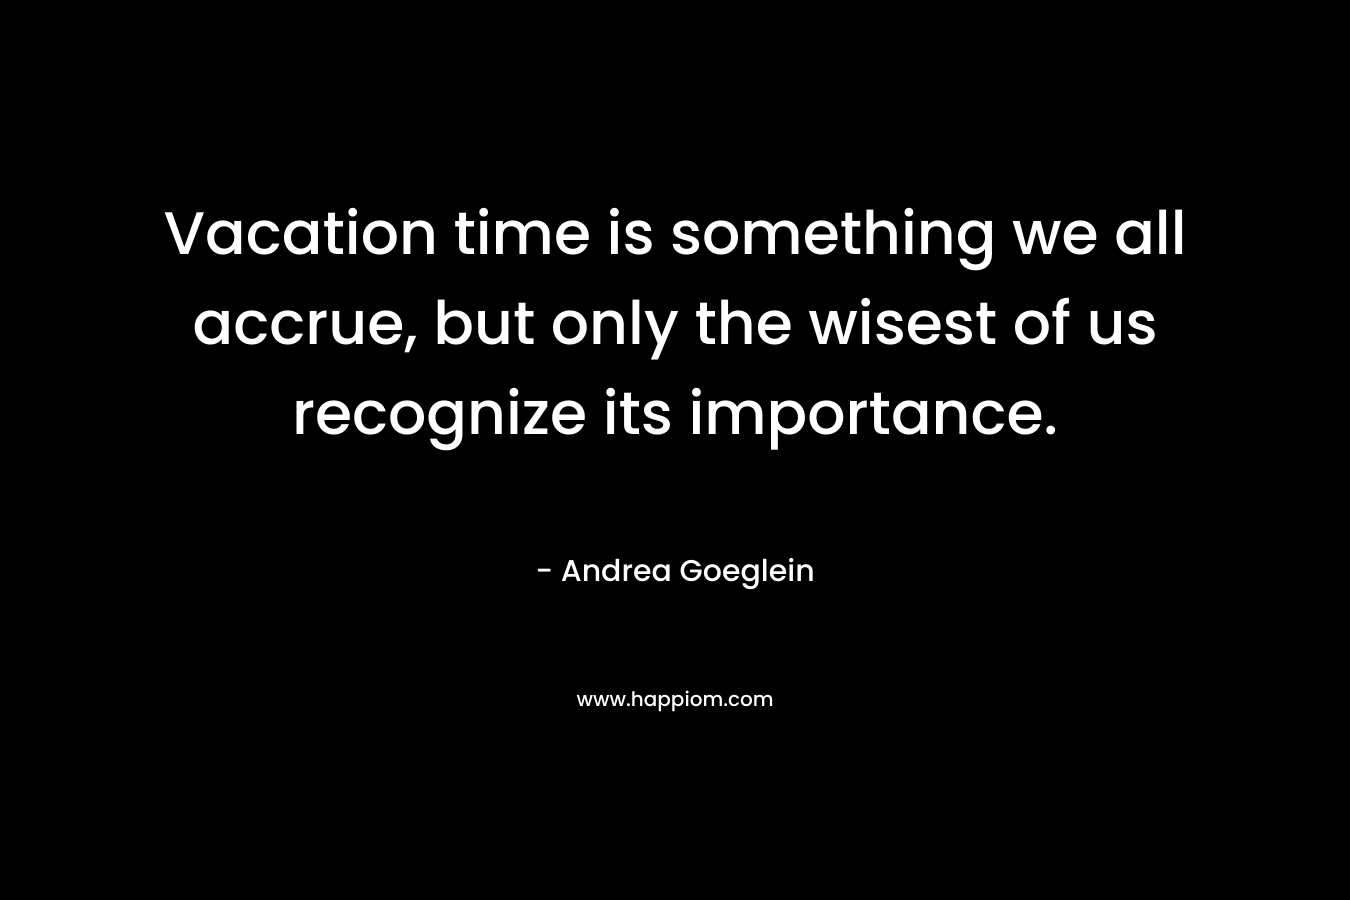 Vacation time is something we all accrue, but only the wisest of us recognize its importance. – Andrea Goeglein